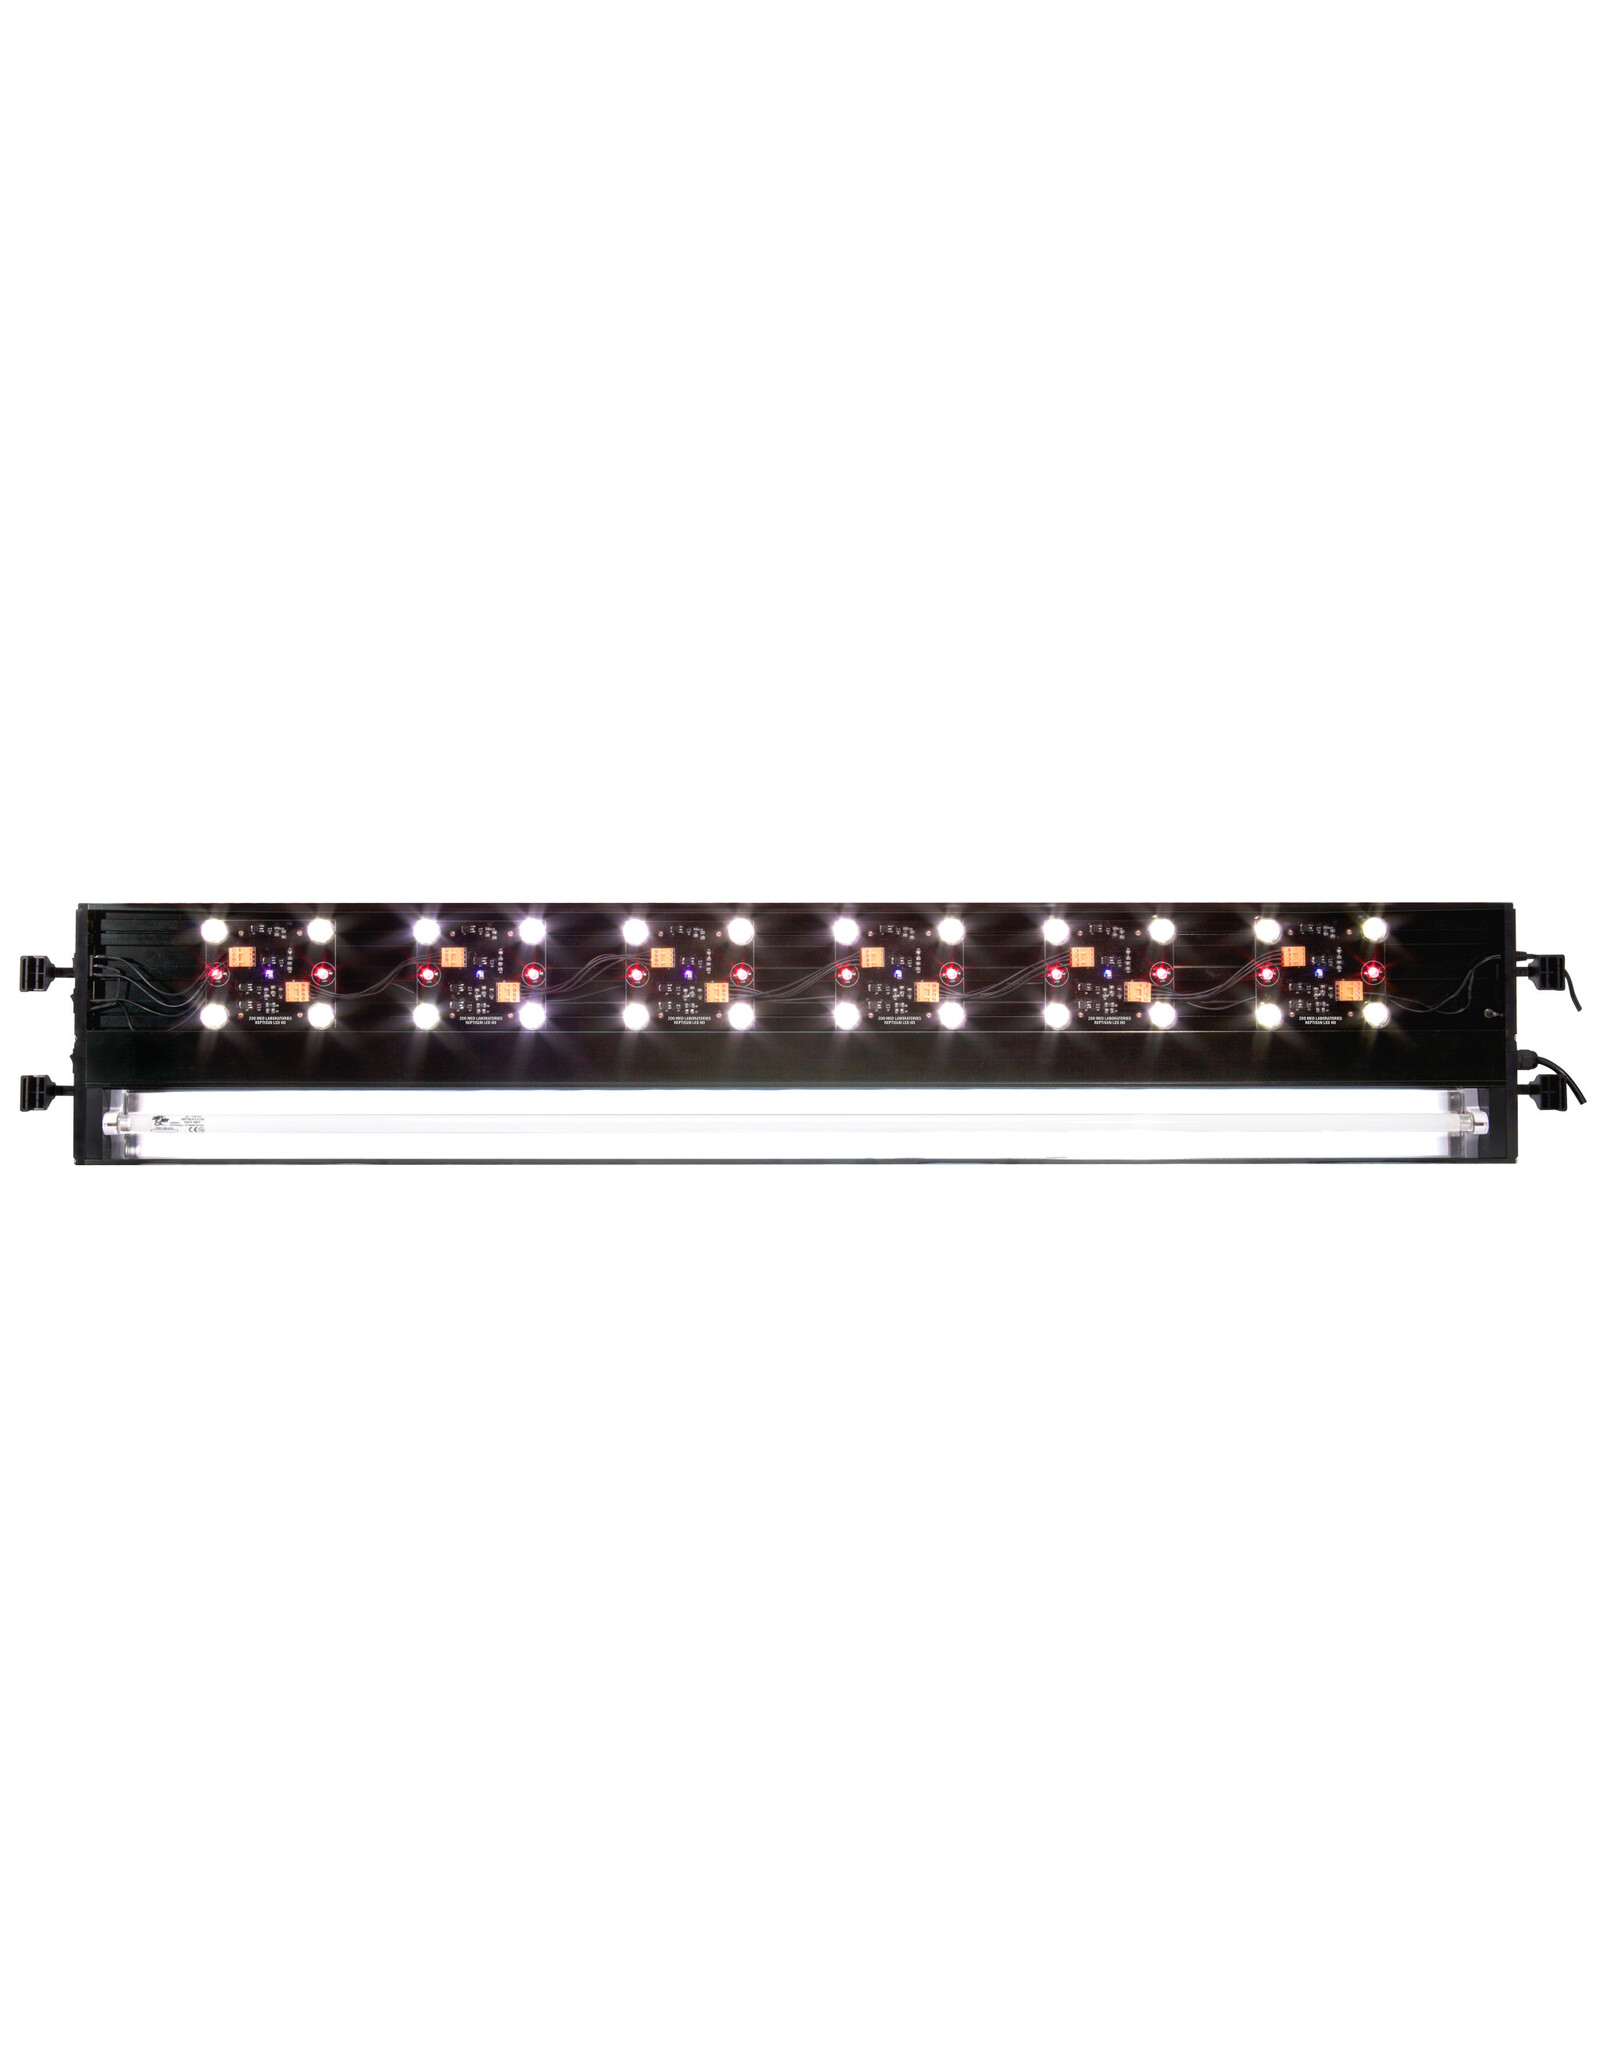 Zoo Med ReptiSun LED/UVB Fixture 48 inch ZM ( UPC 0893 )